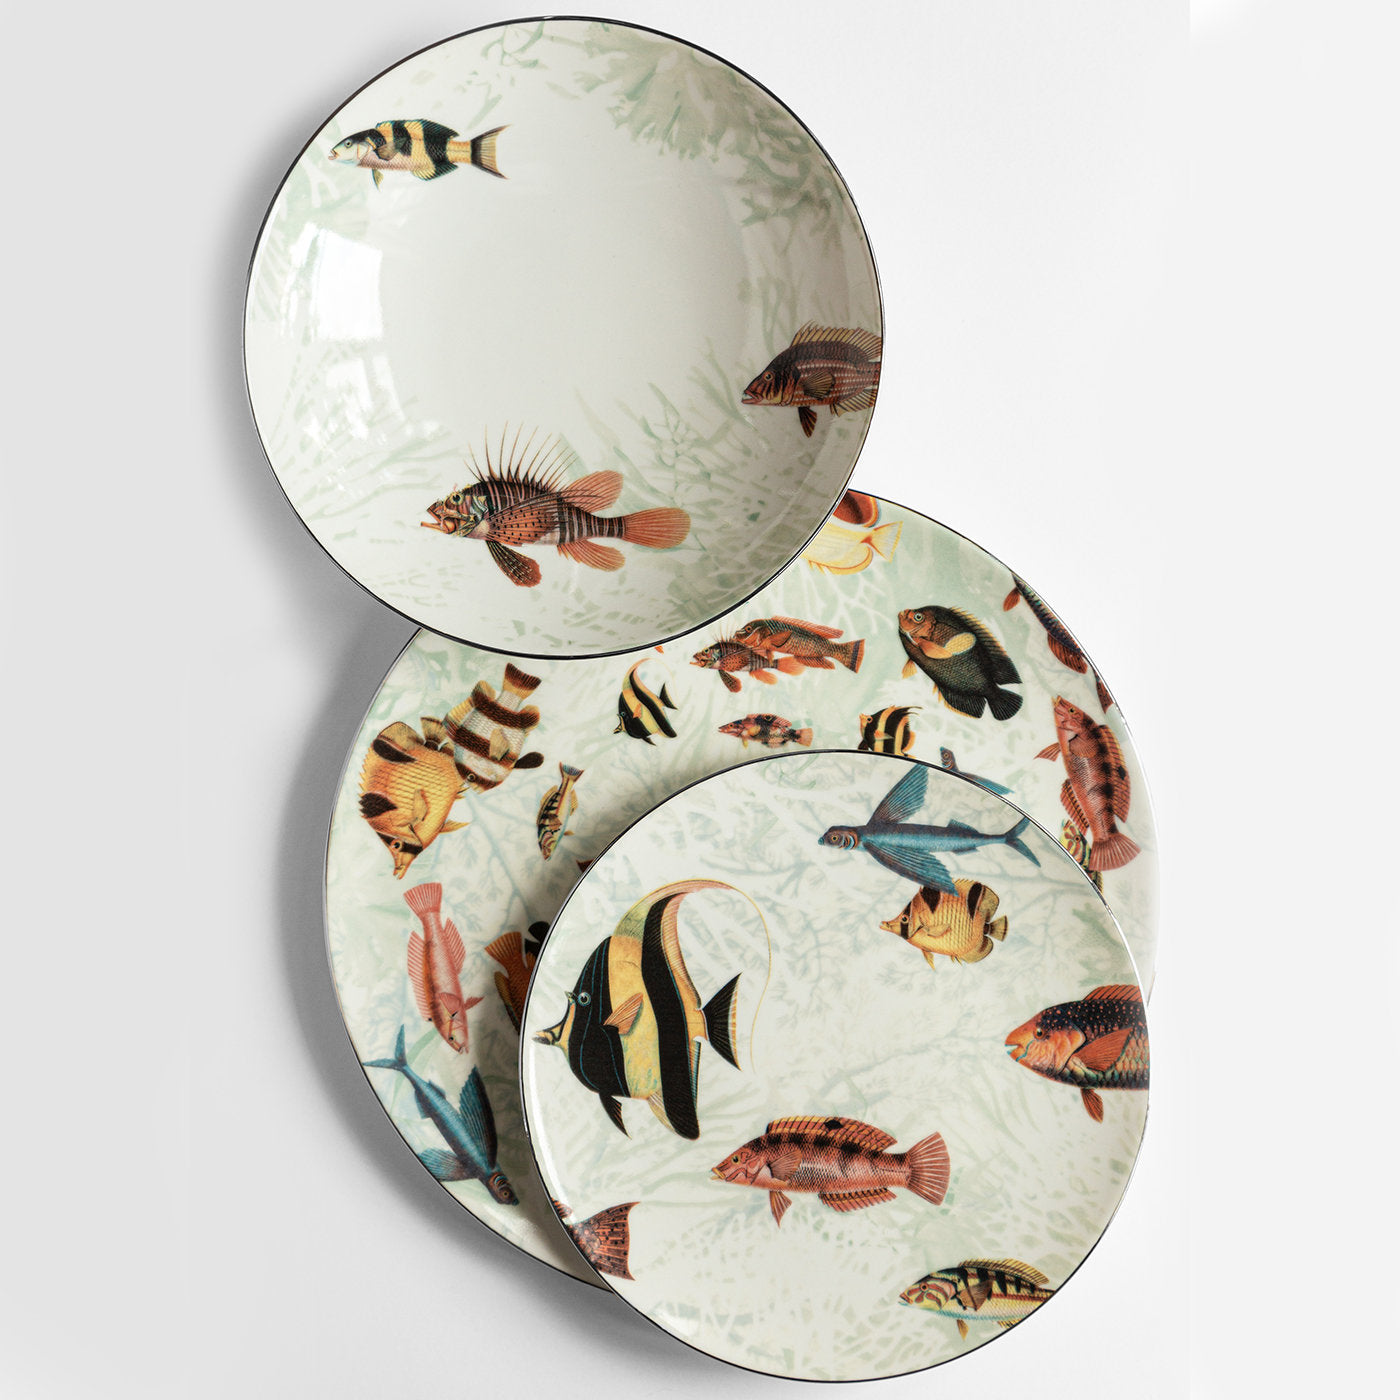 Amami Porcelain Soup Plate With Tropical Fish #4 - Alternative view 1